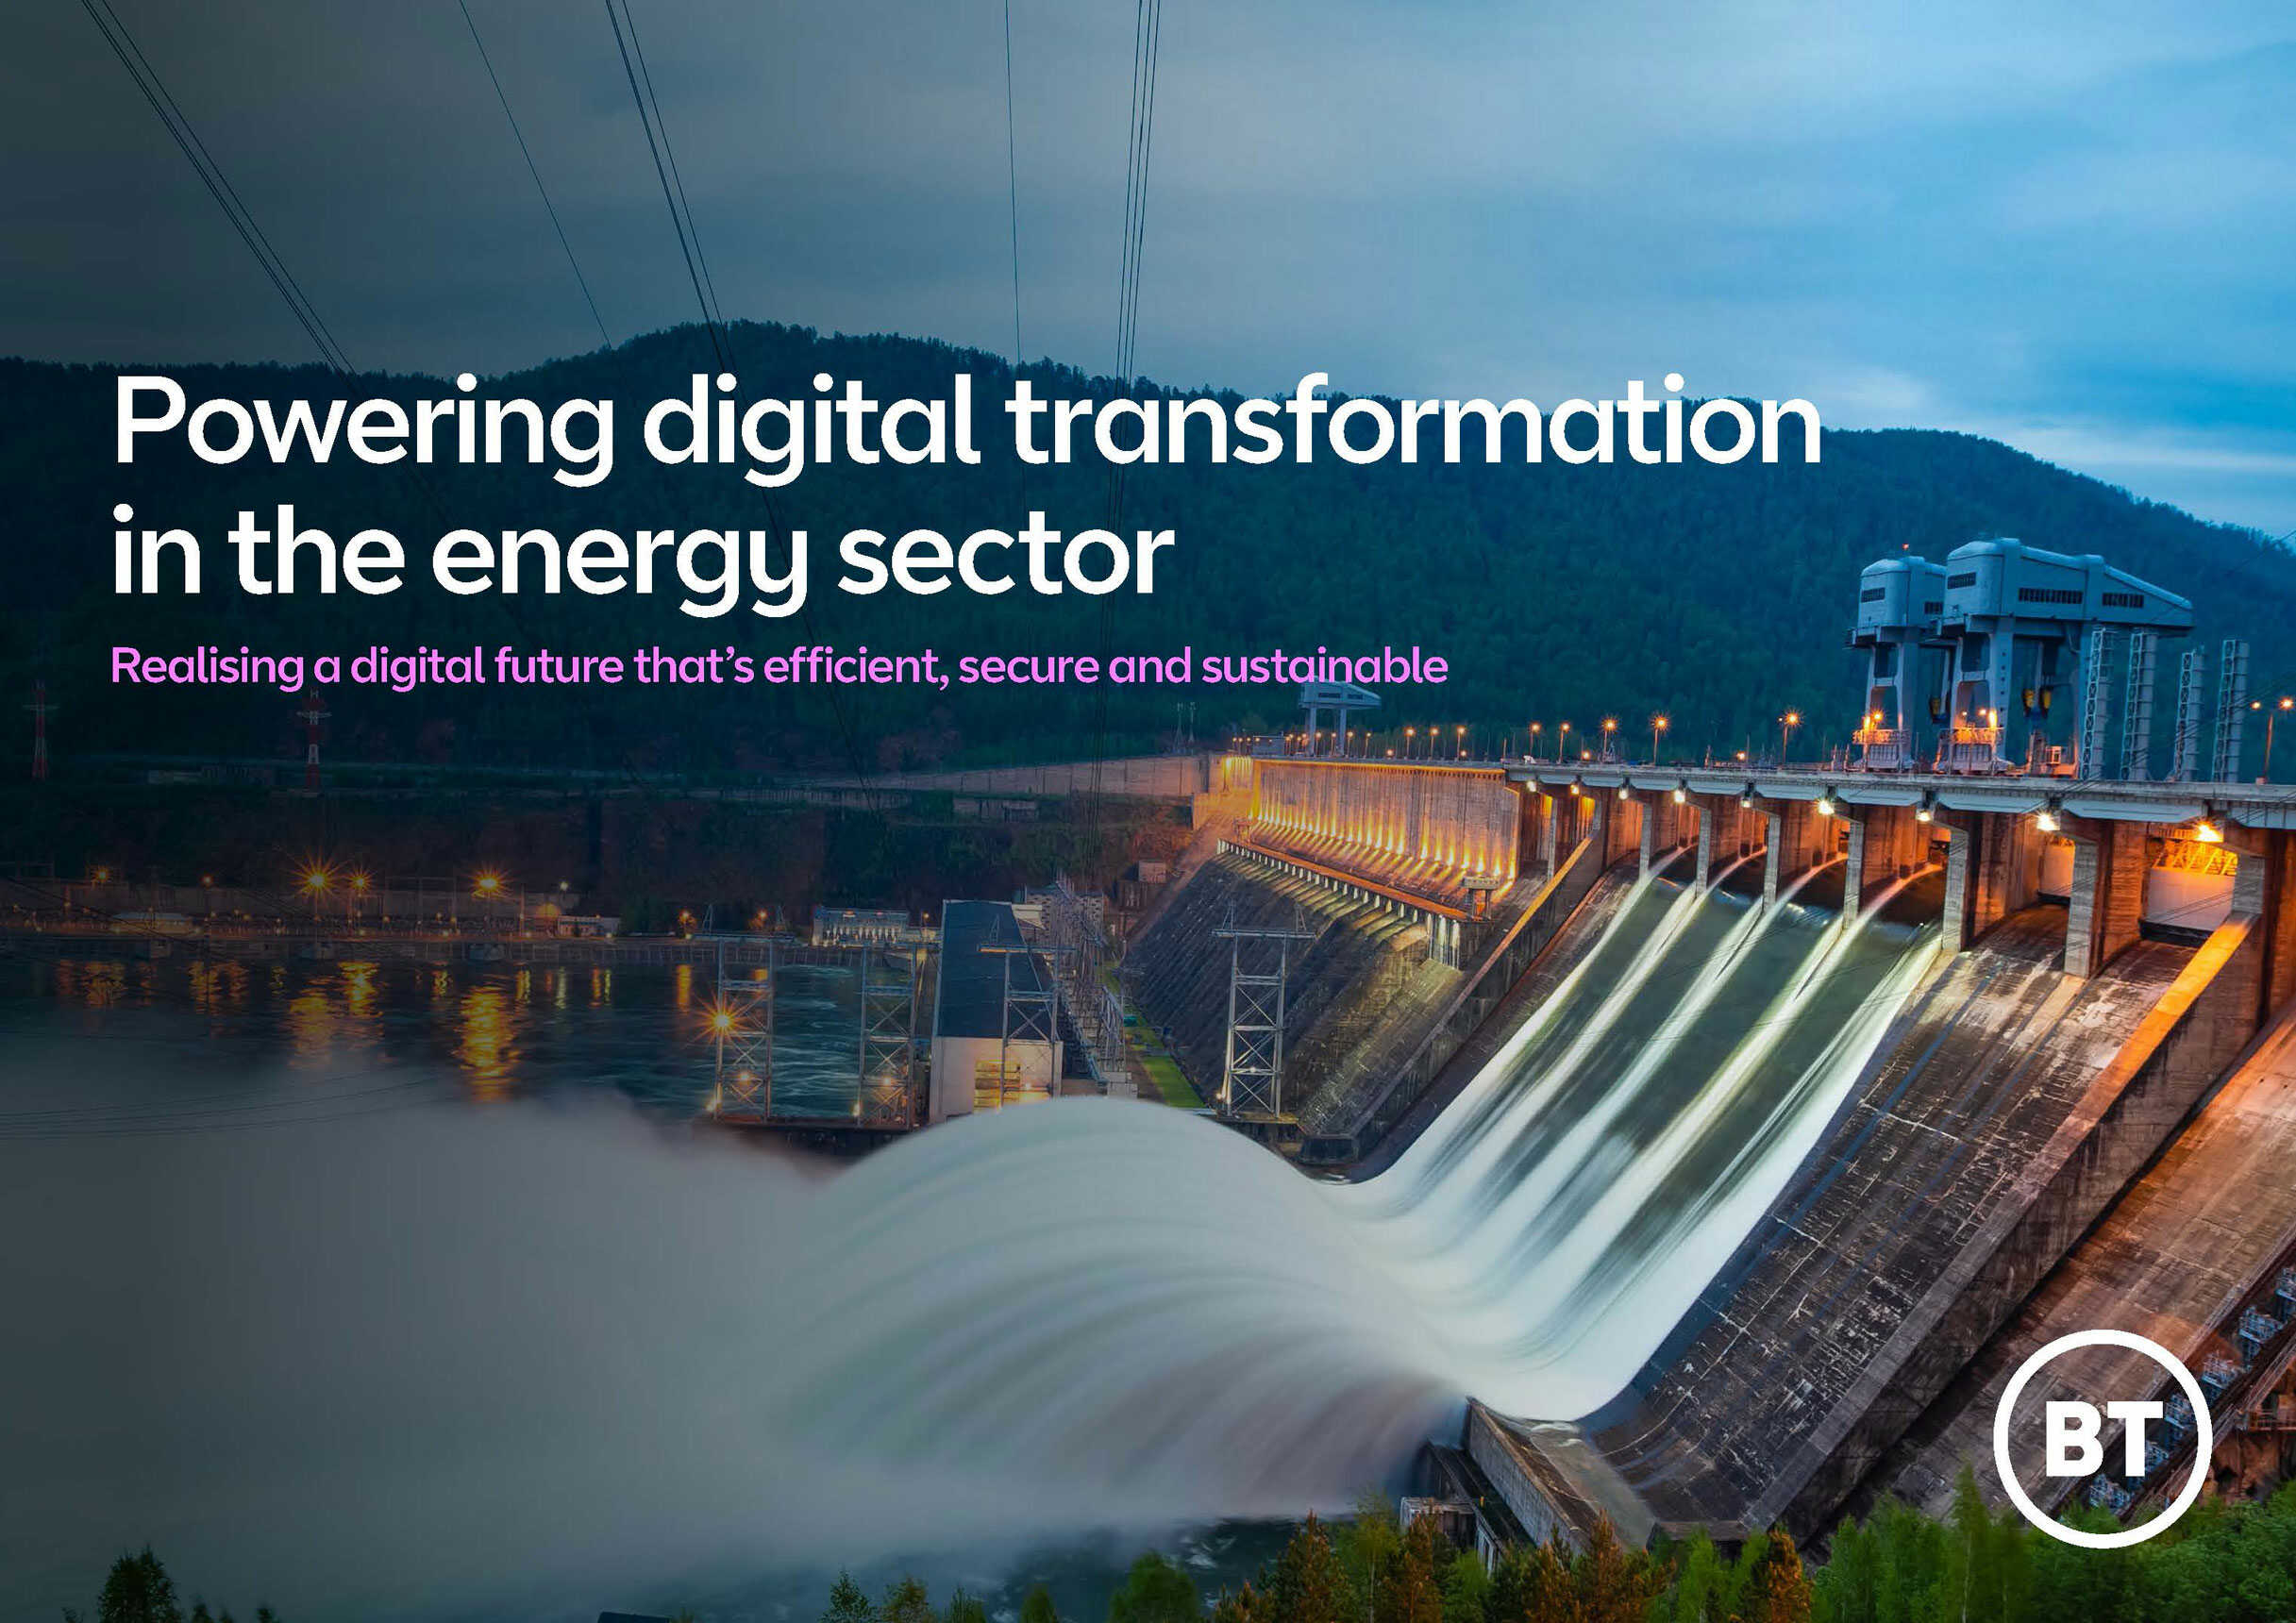 Digital in the energy sector